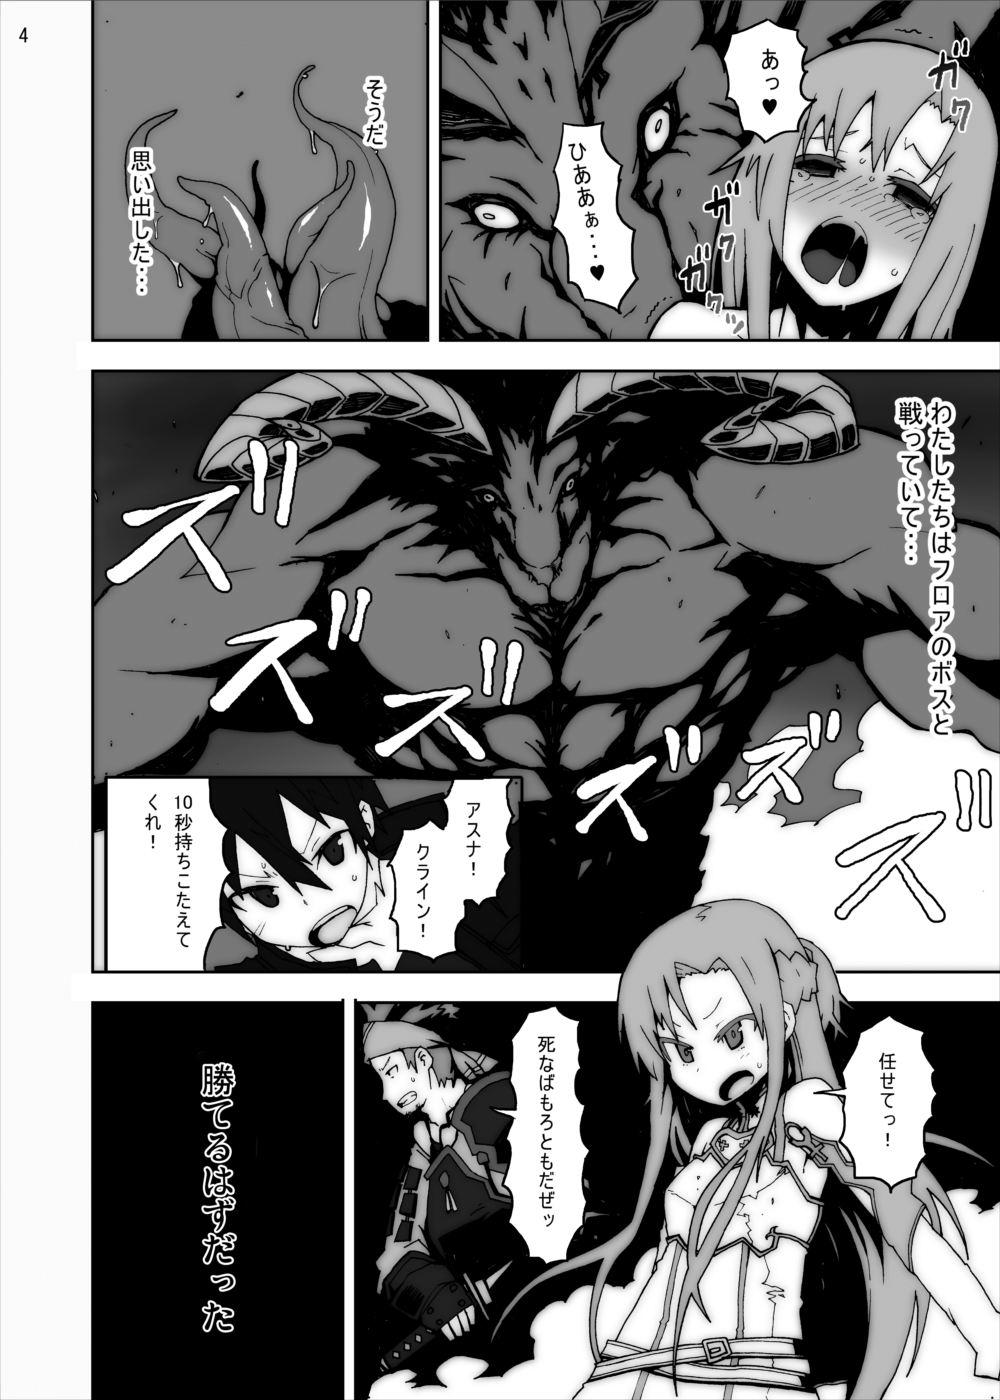 Abuse Asuna in Tentacle Party Rape Online - Sword art online Gay Smoking - Page 3